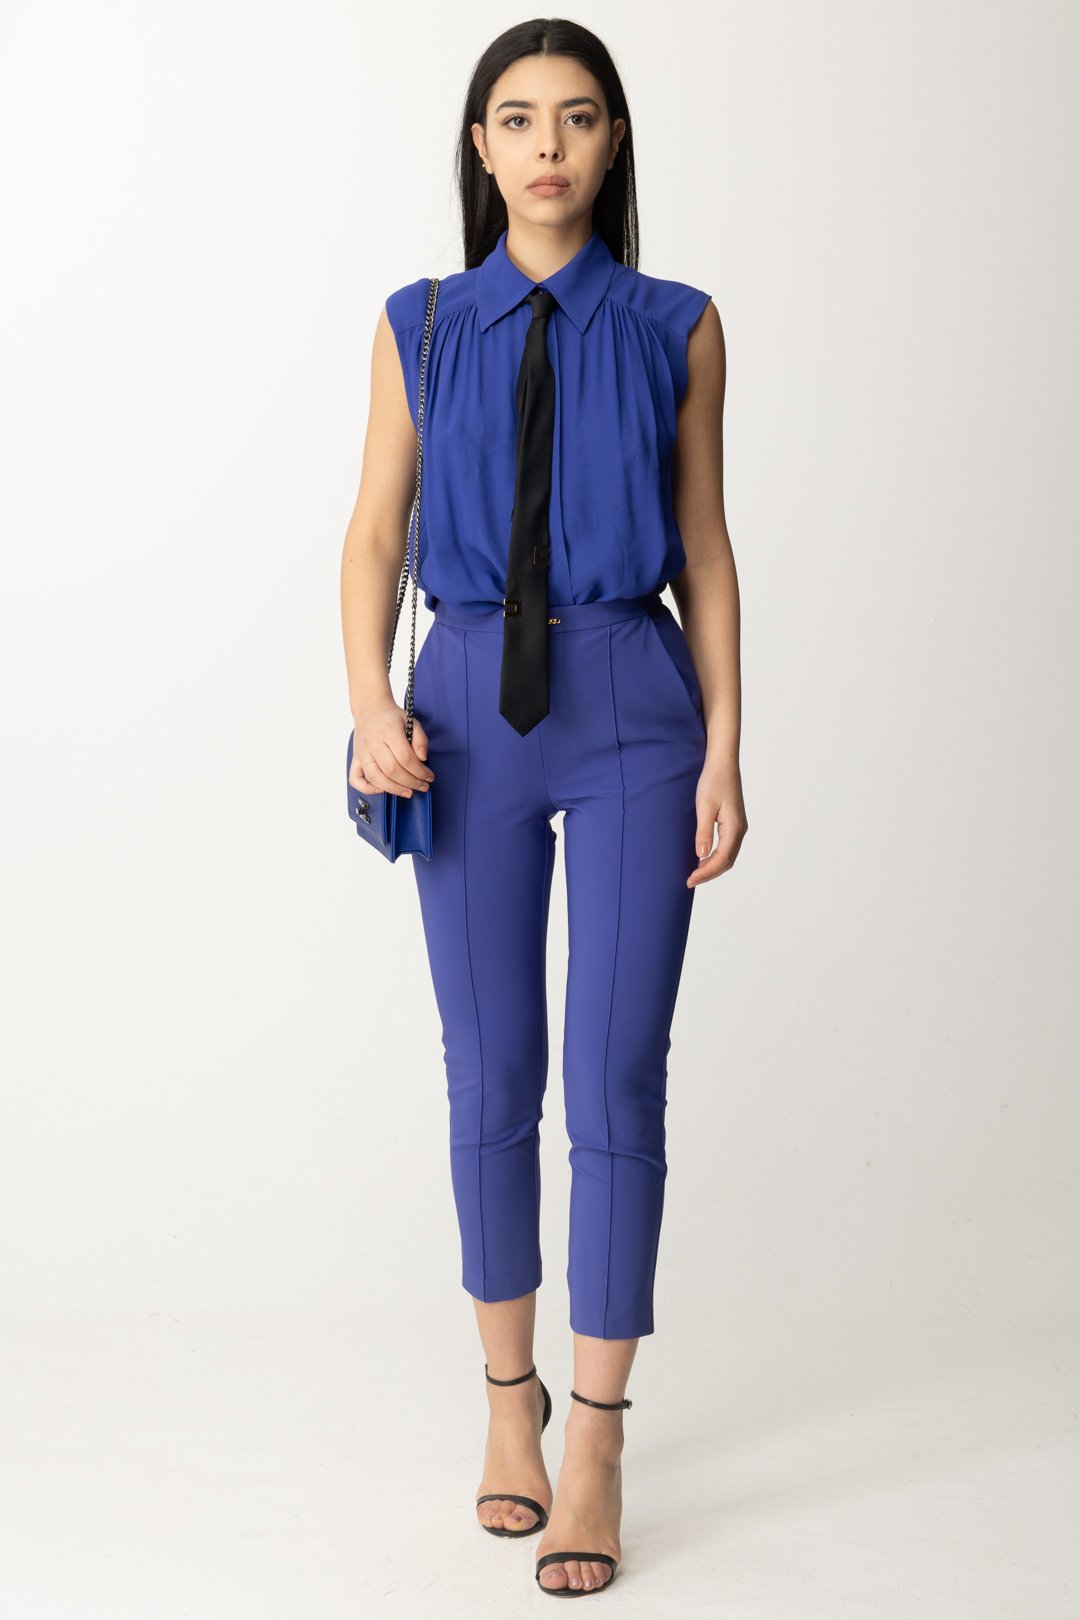 Preview: Elisabetta Franchi Sleeveless shirt with tie BLUE INDACO